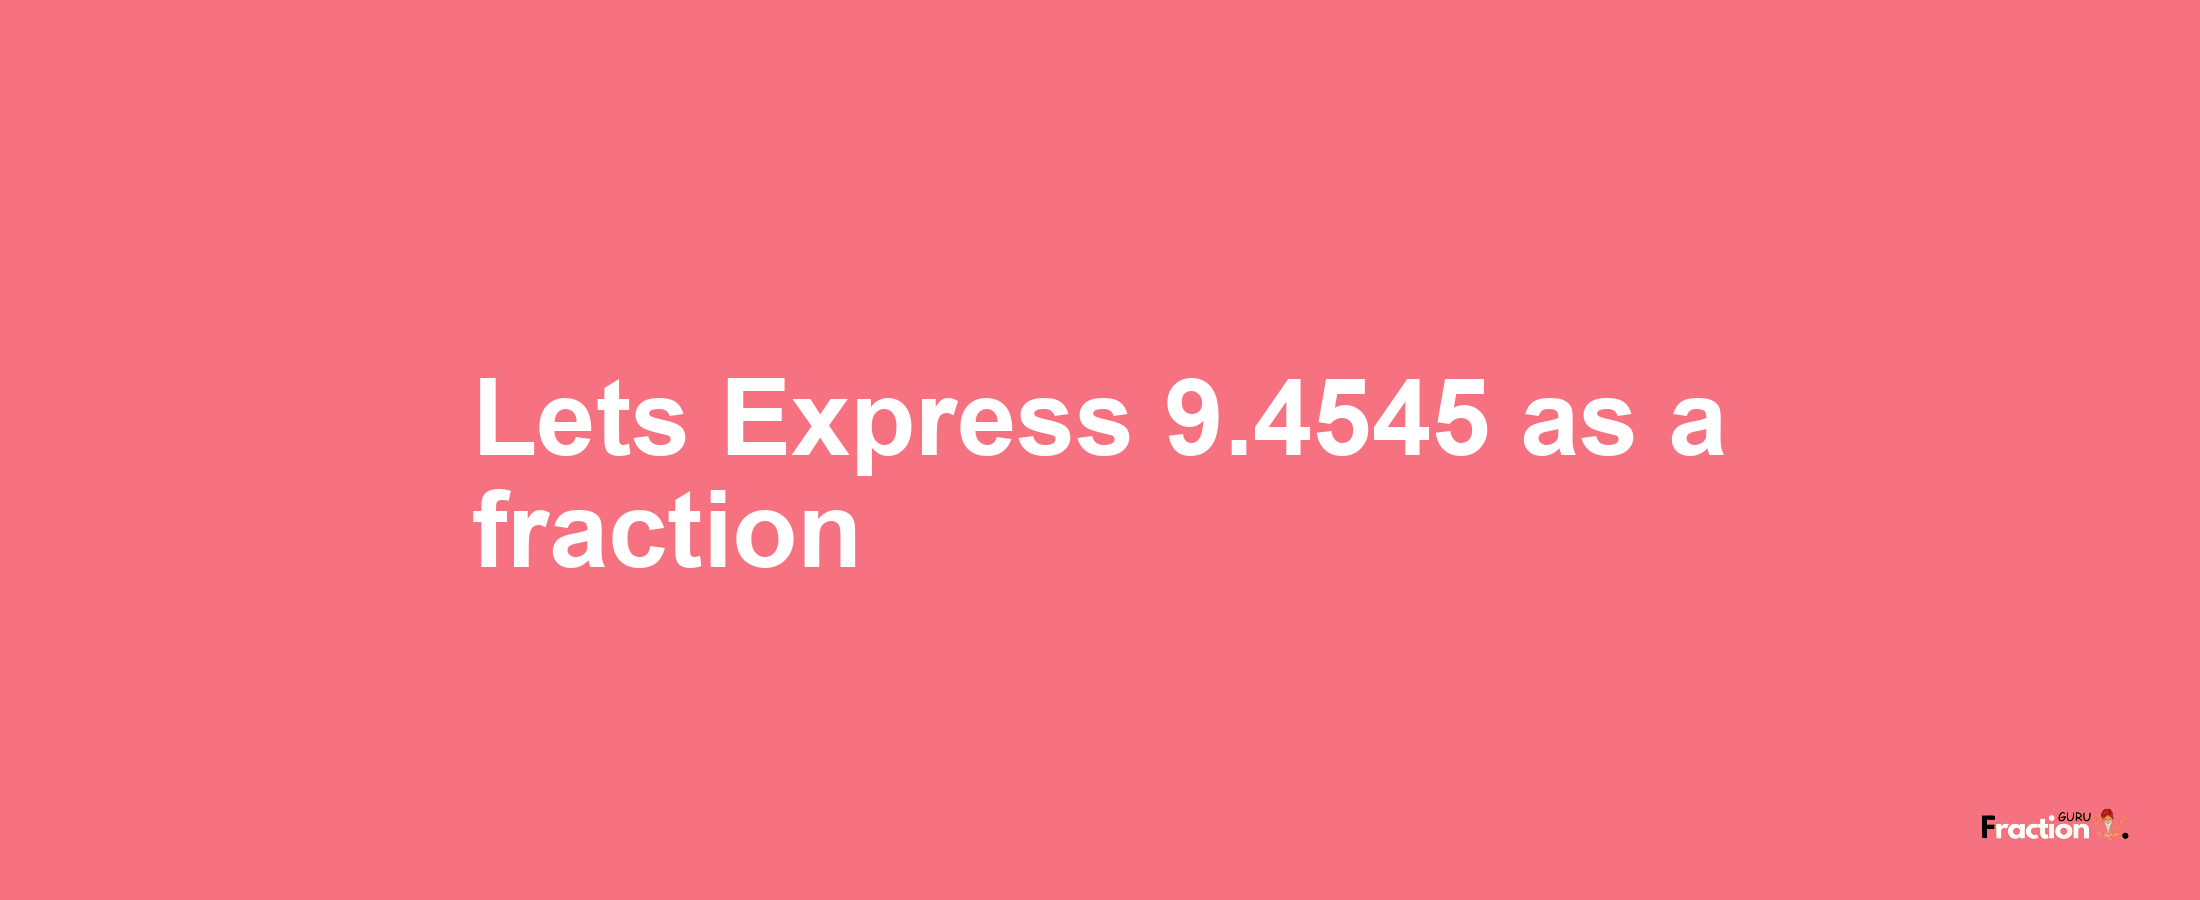 Lets Express 9.4545 as afraction